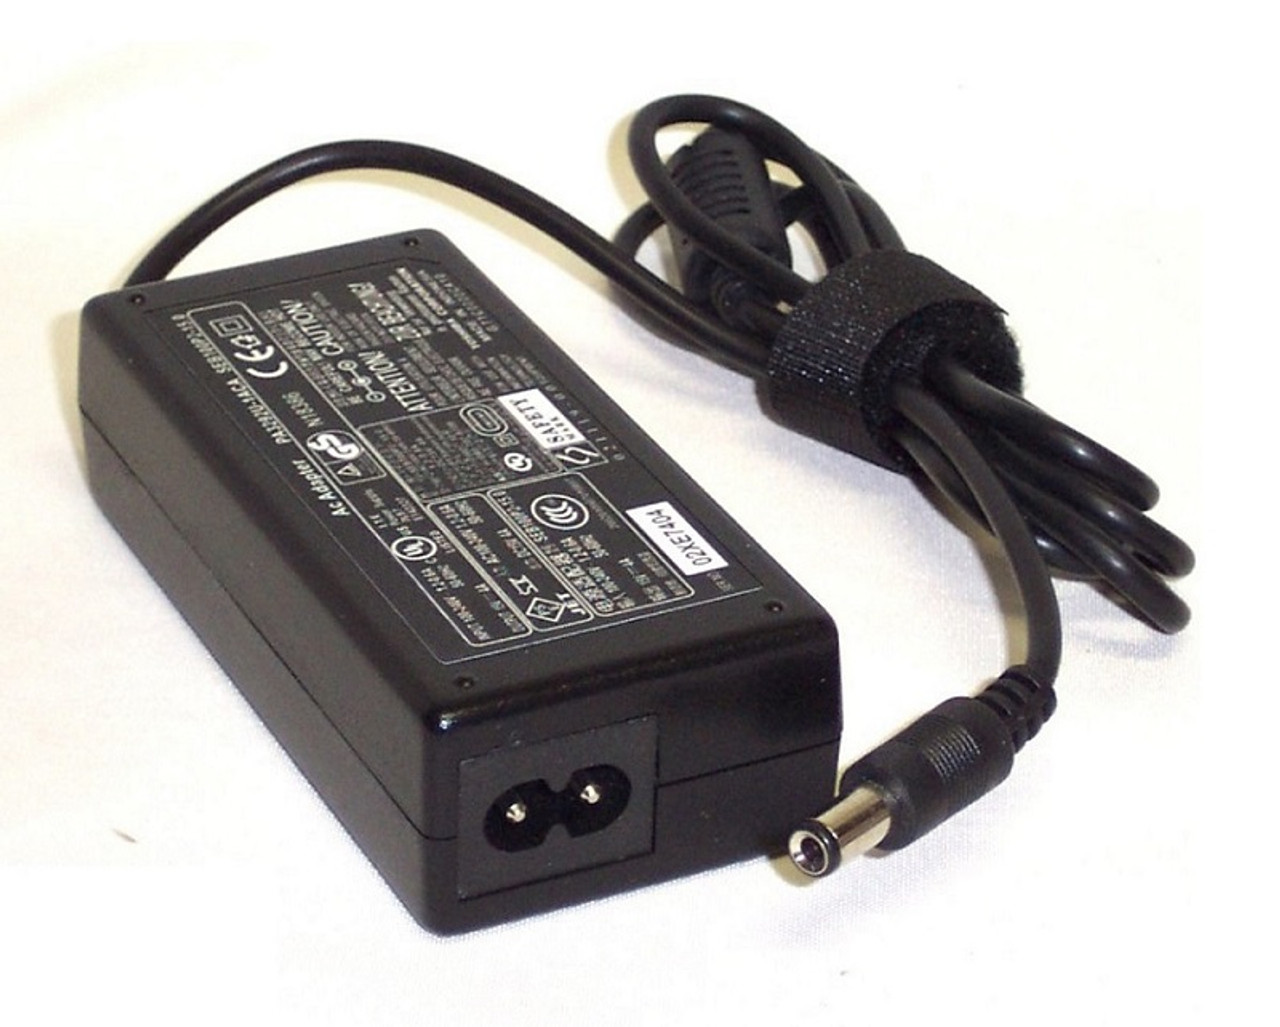 614023-001 - HP 90-Watts Smart-Pin Auto/air/ac Adapter for Laptop Pcs